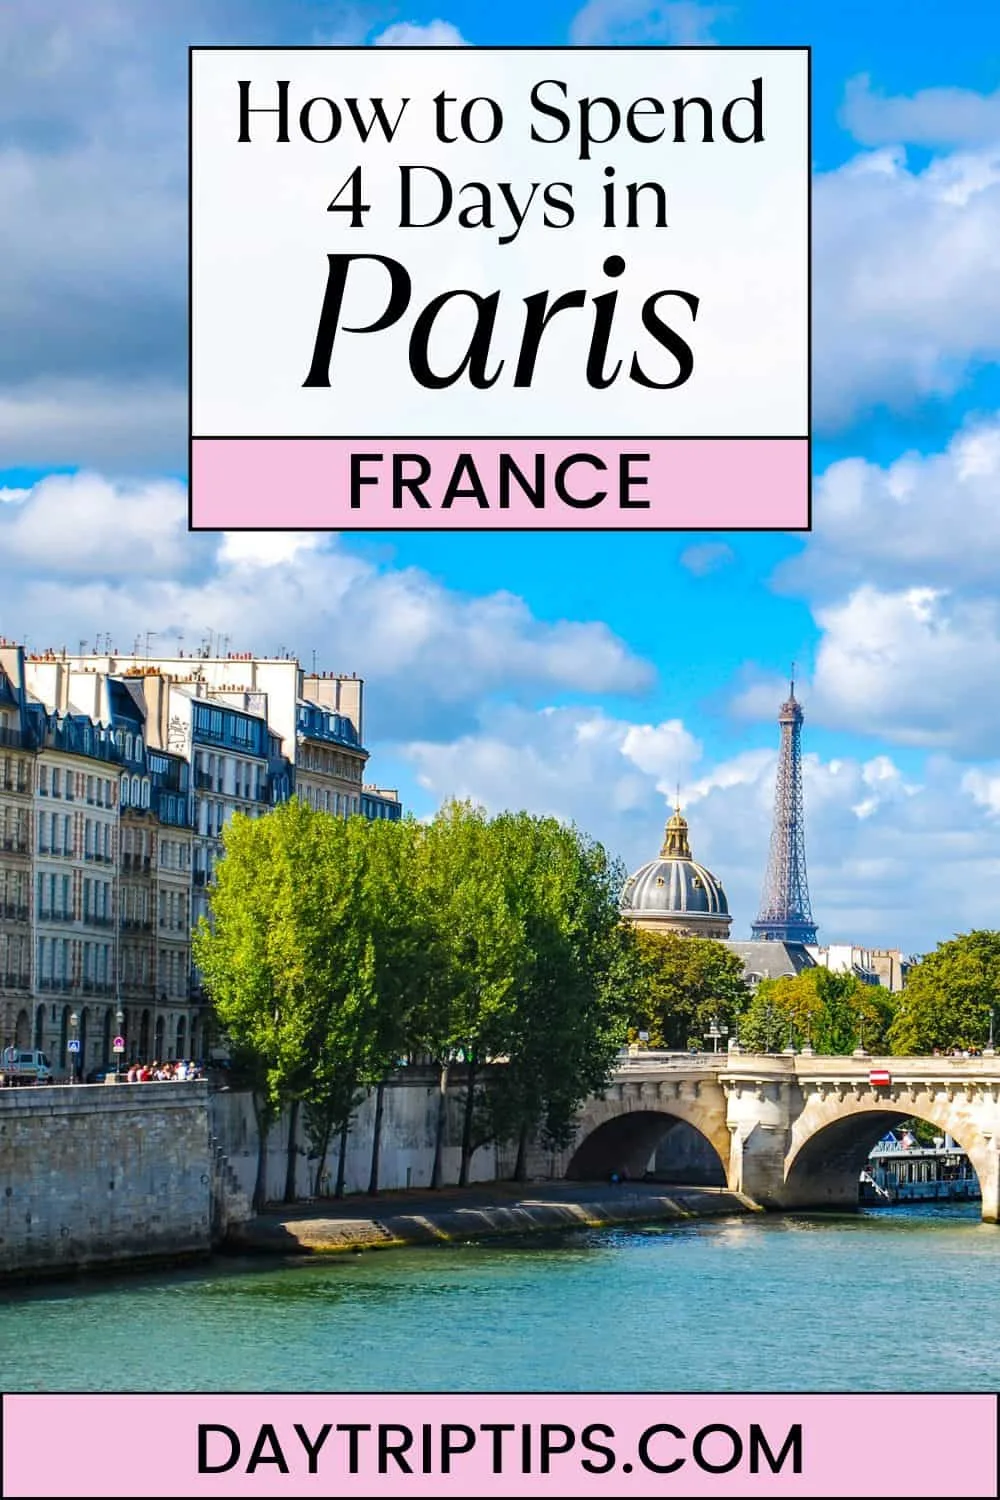 How to Have the BEST 4 Days in Paris